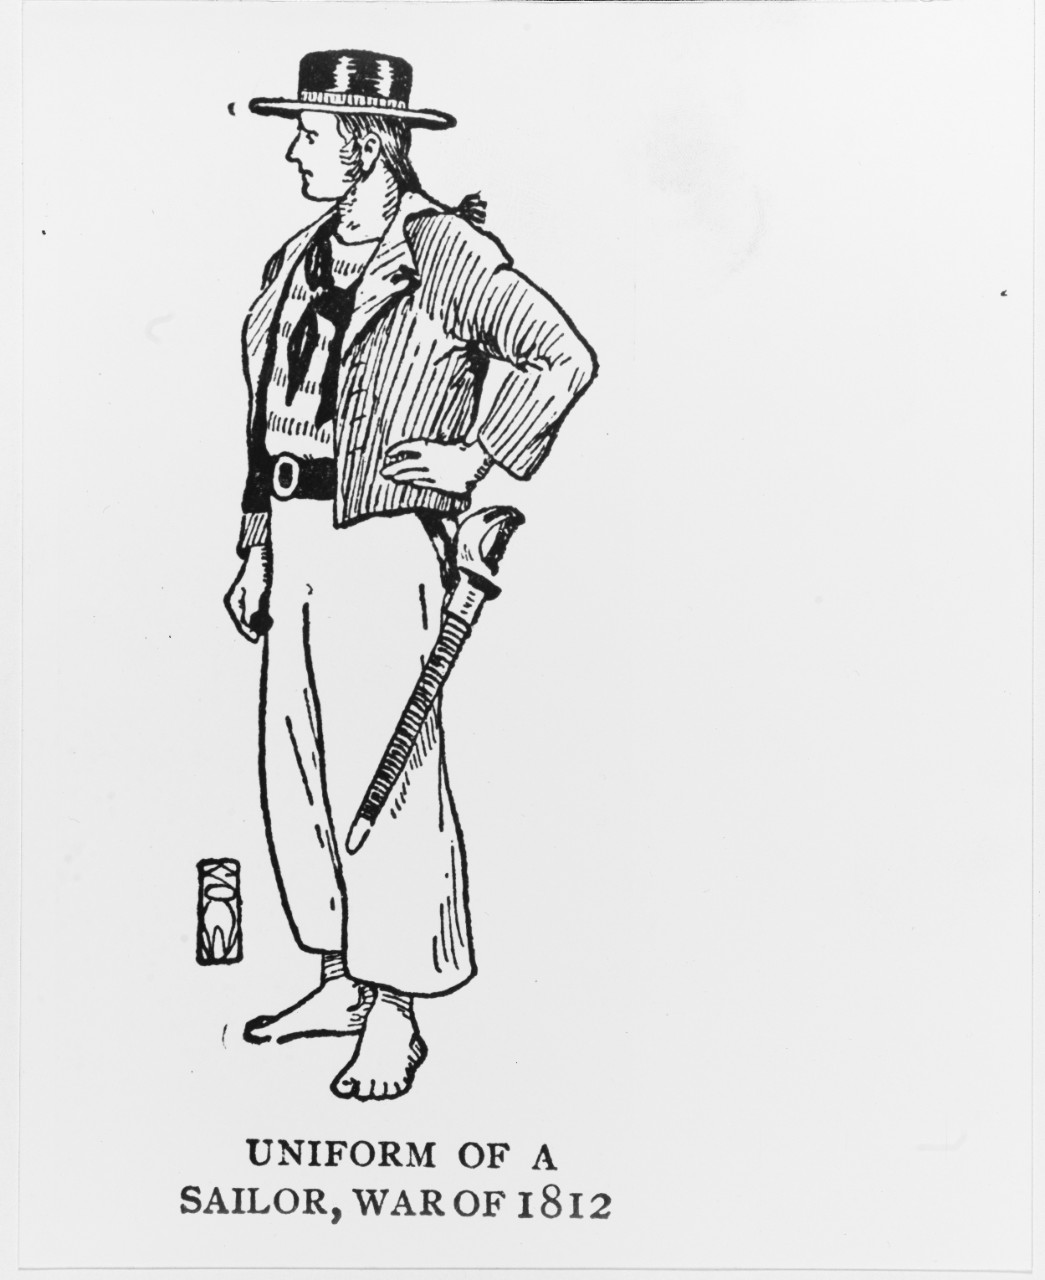 A sailor of the War of 1812 period